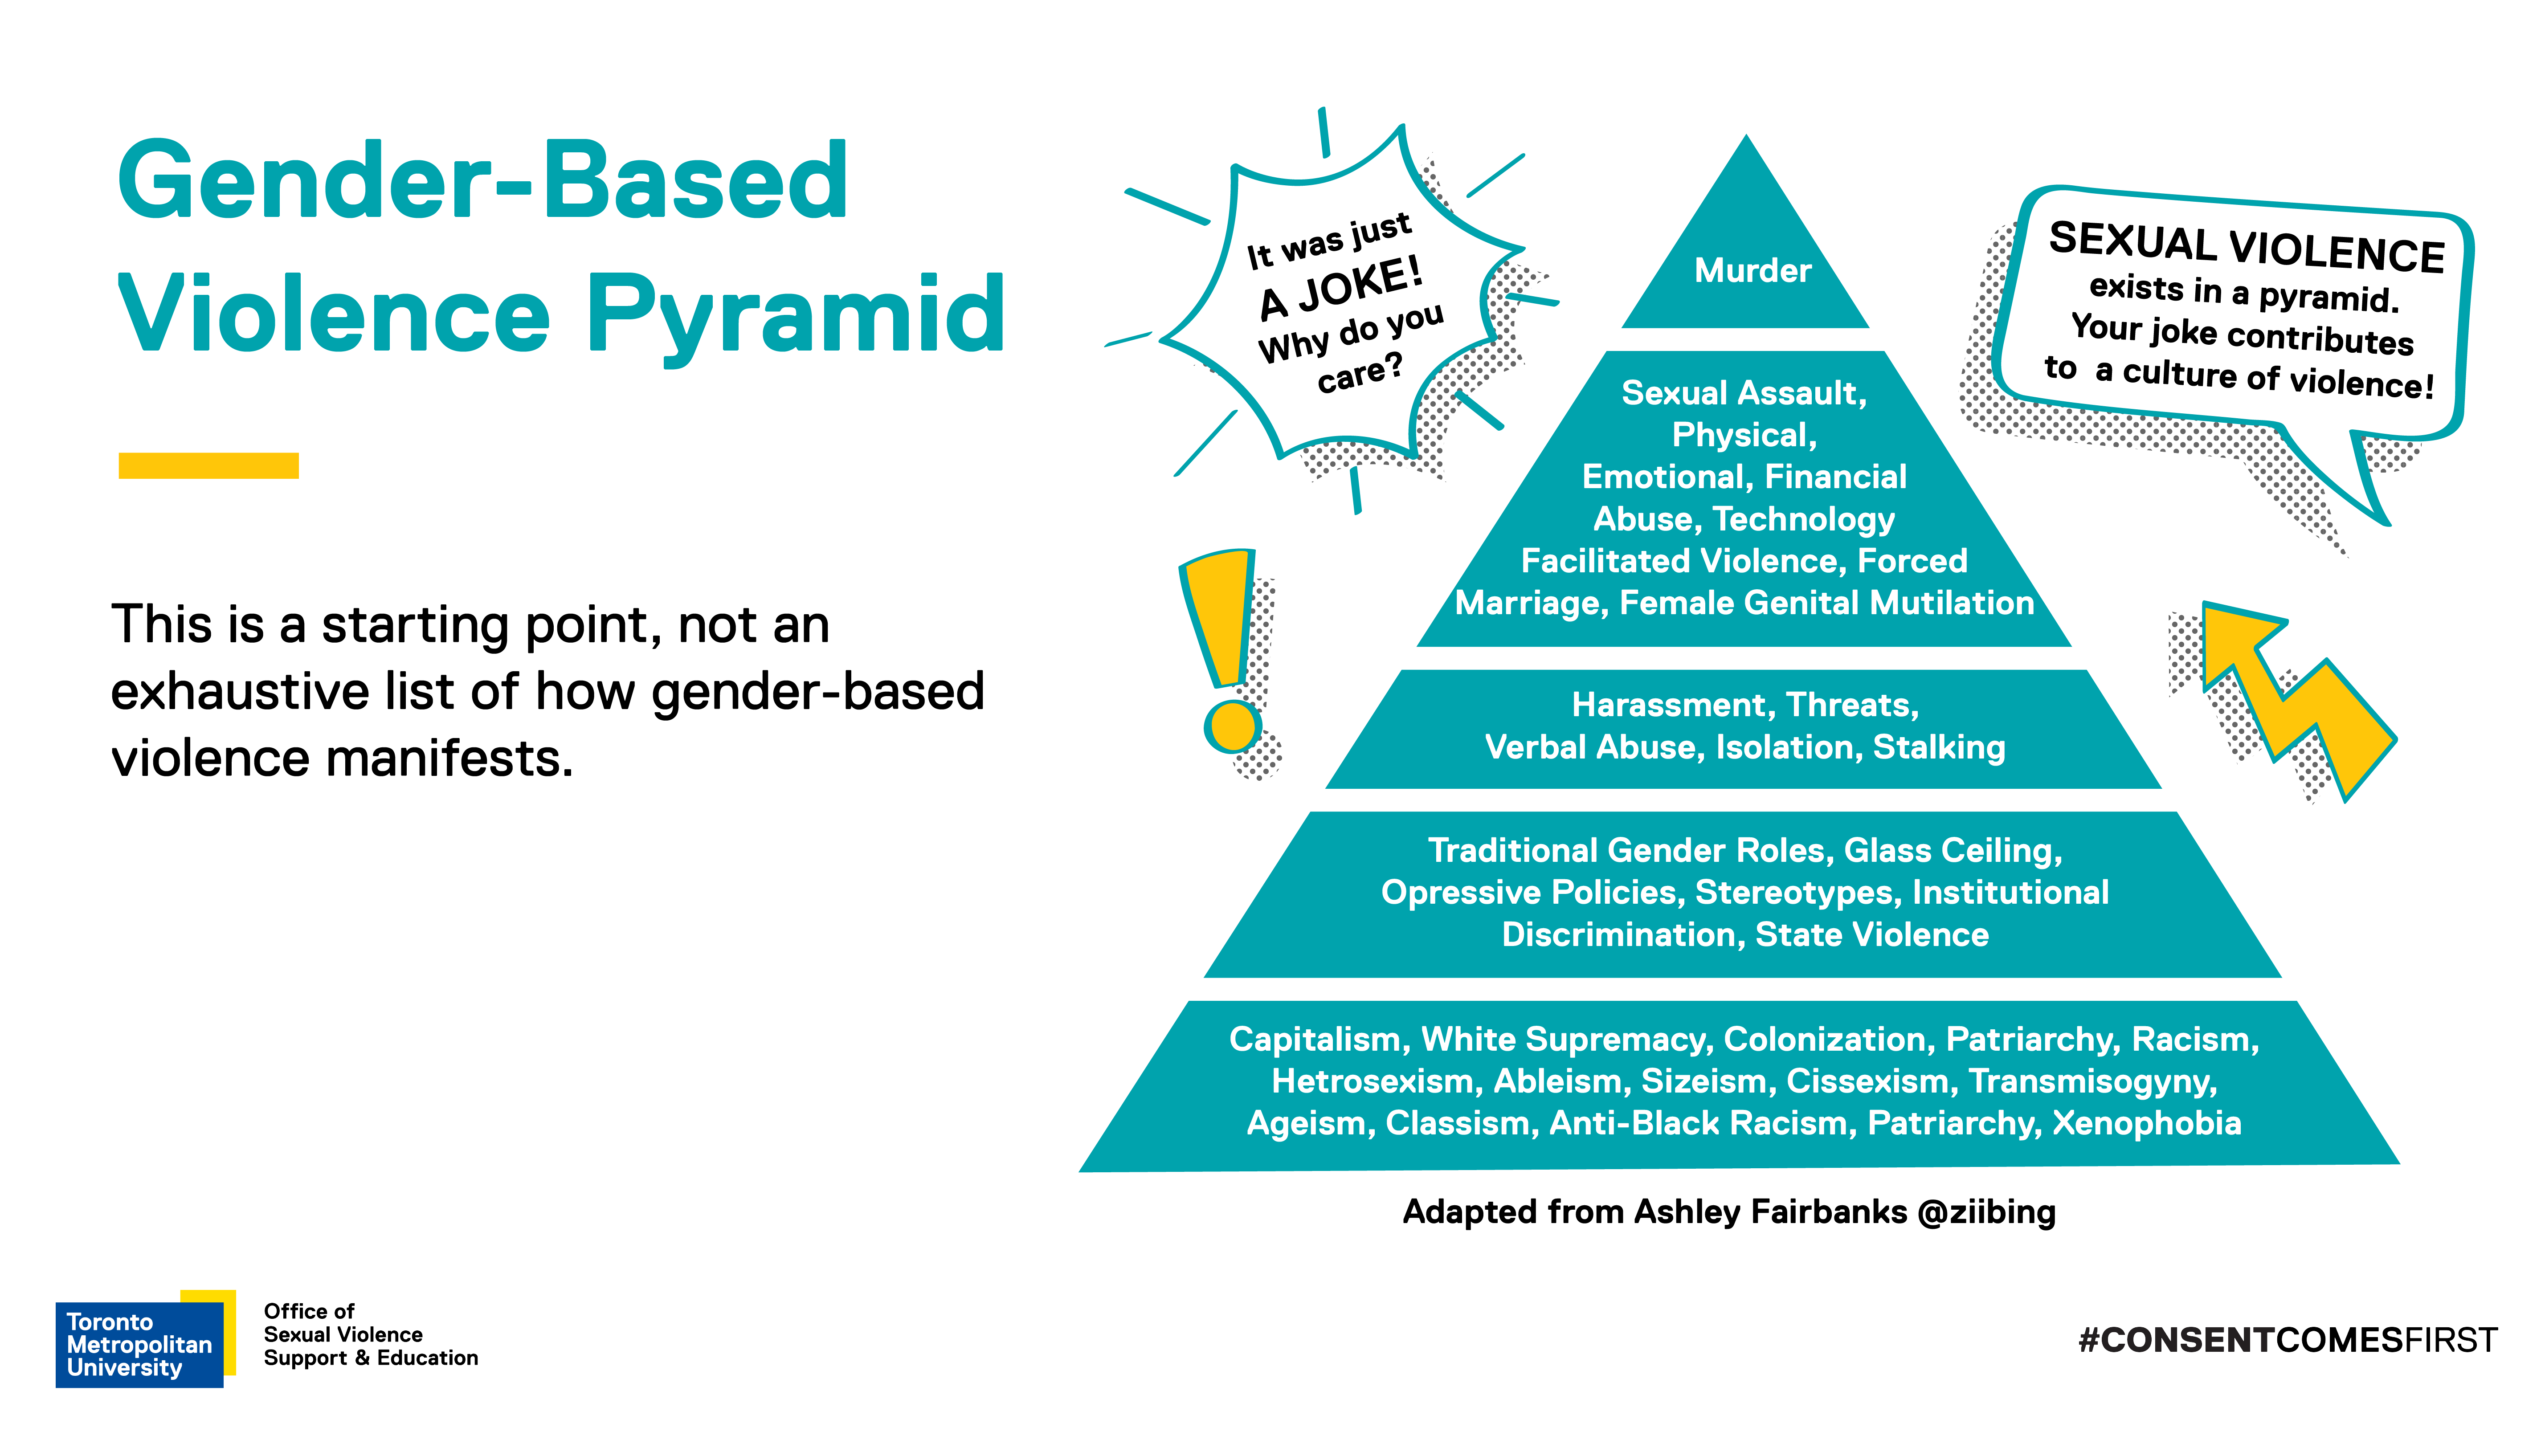 A Gender-based Violence Pyramid, with five levels, which demonstrates how gender-based violence manifests.